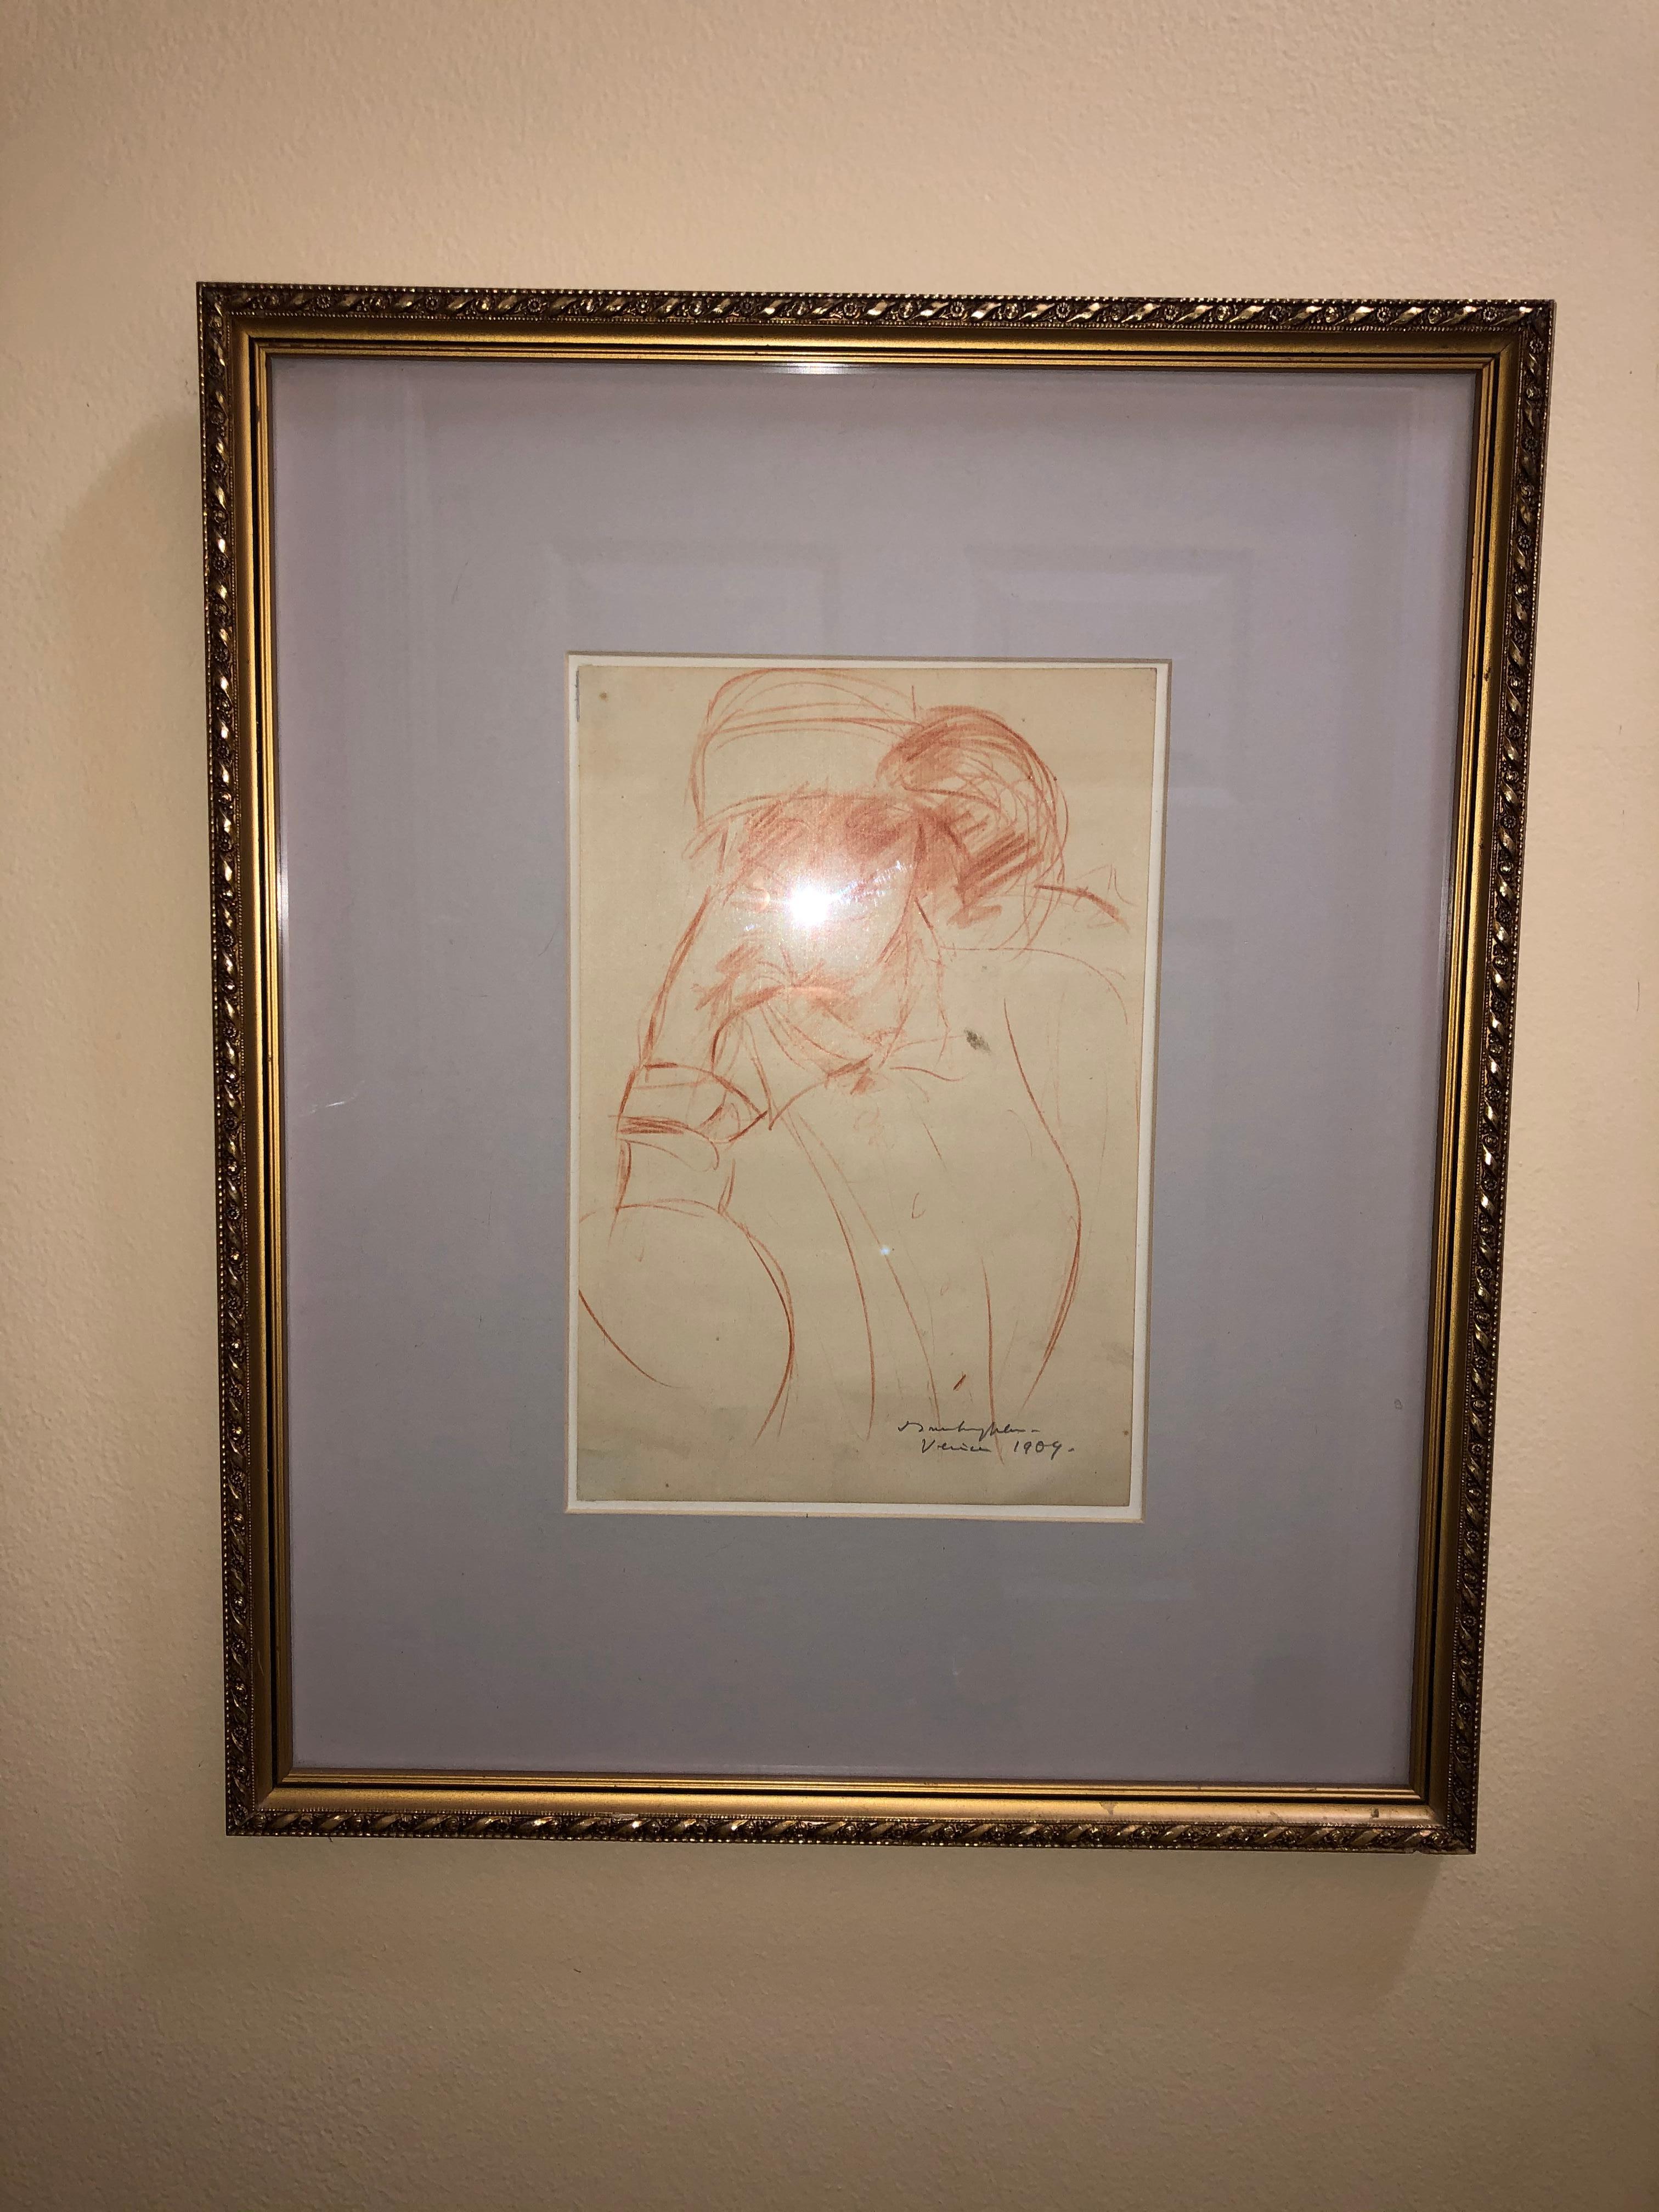 A bit of a mystery scholarly sanguine drawing. Very well executed portrait of a Lady dated either 1904, 1907, or 1909 in Venice. It is signed but I cannot make it out. The paper measures 10 inches high by 6 3/4 wide. The beautiful Custom made frame